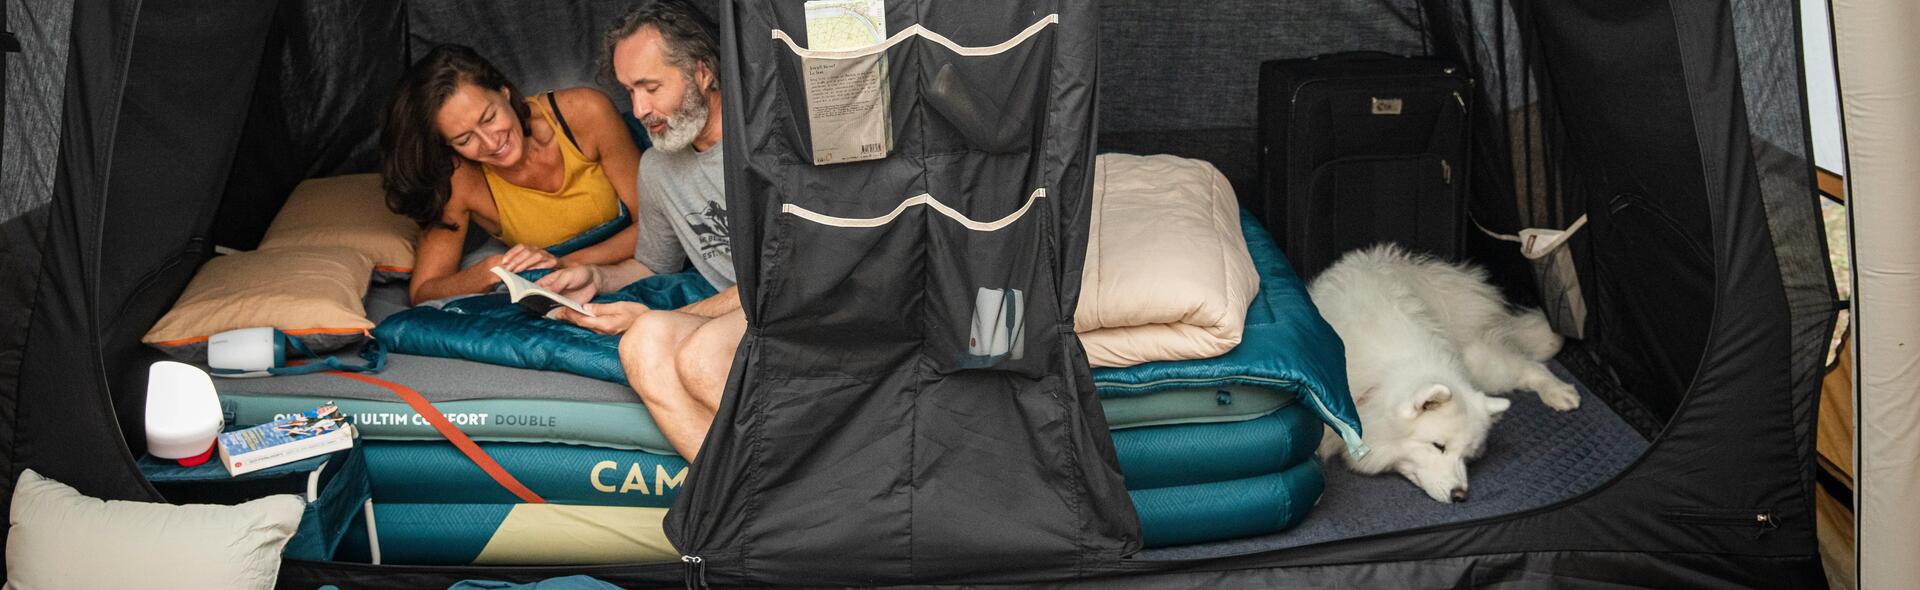 Which camp bed should I choose?